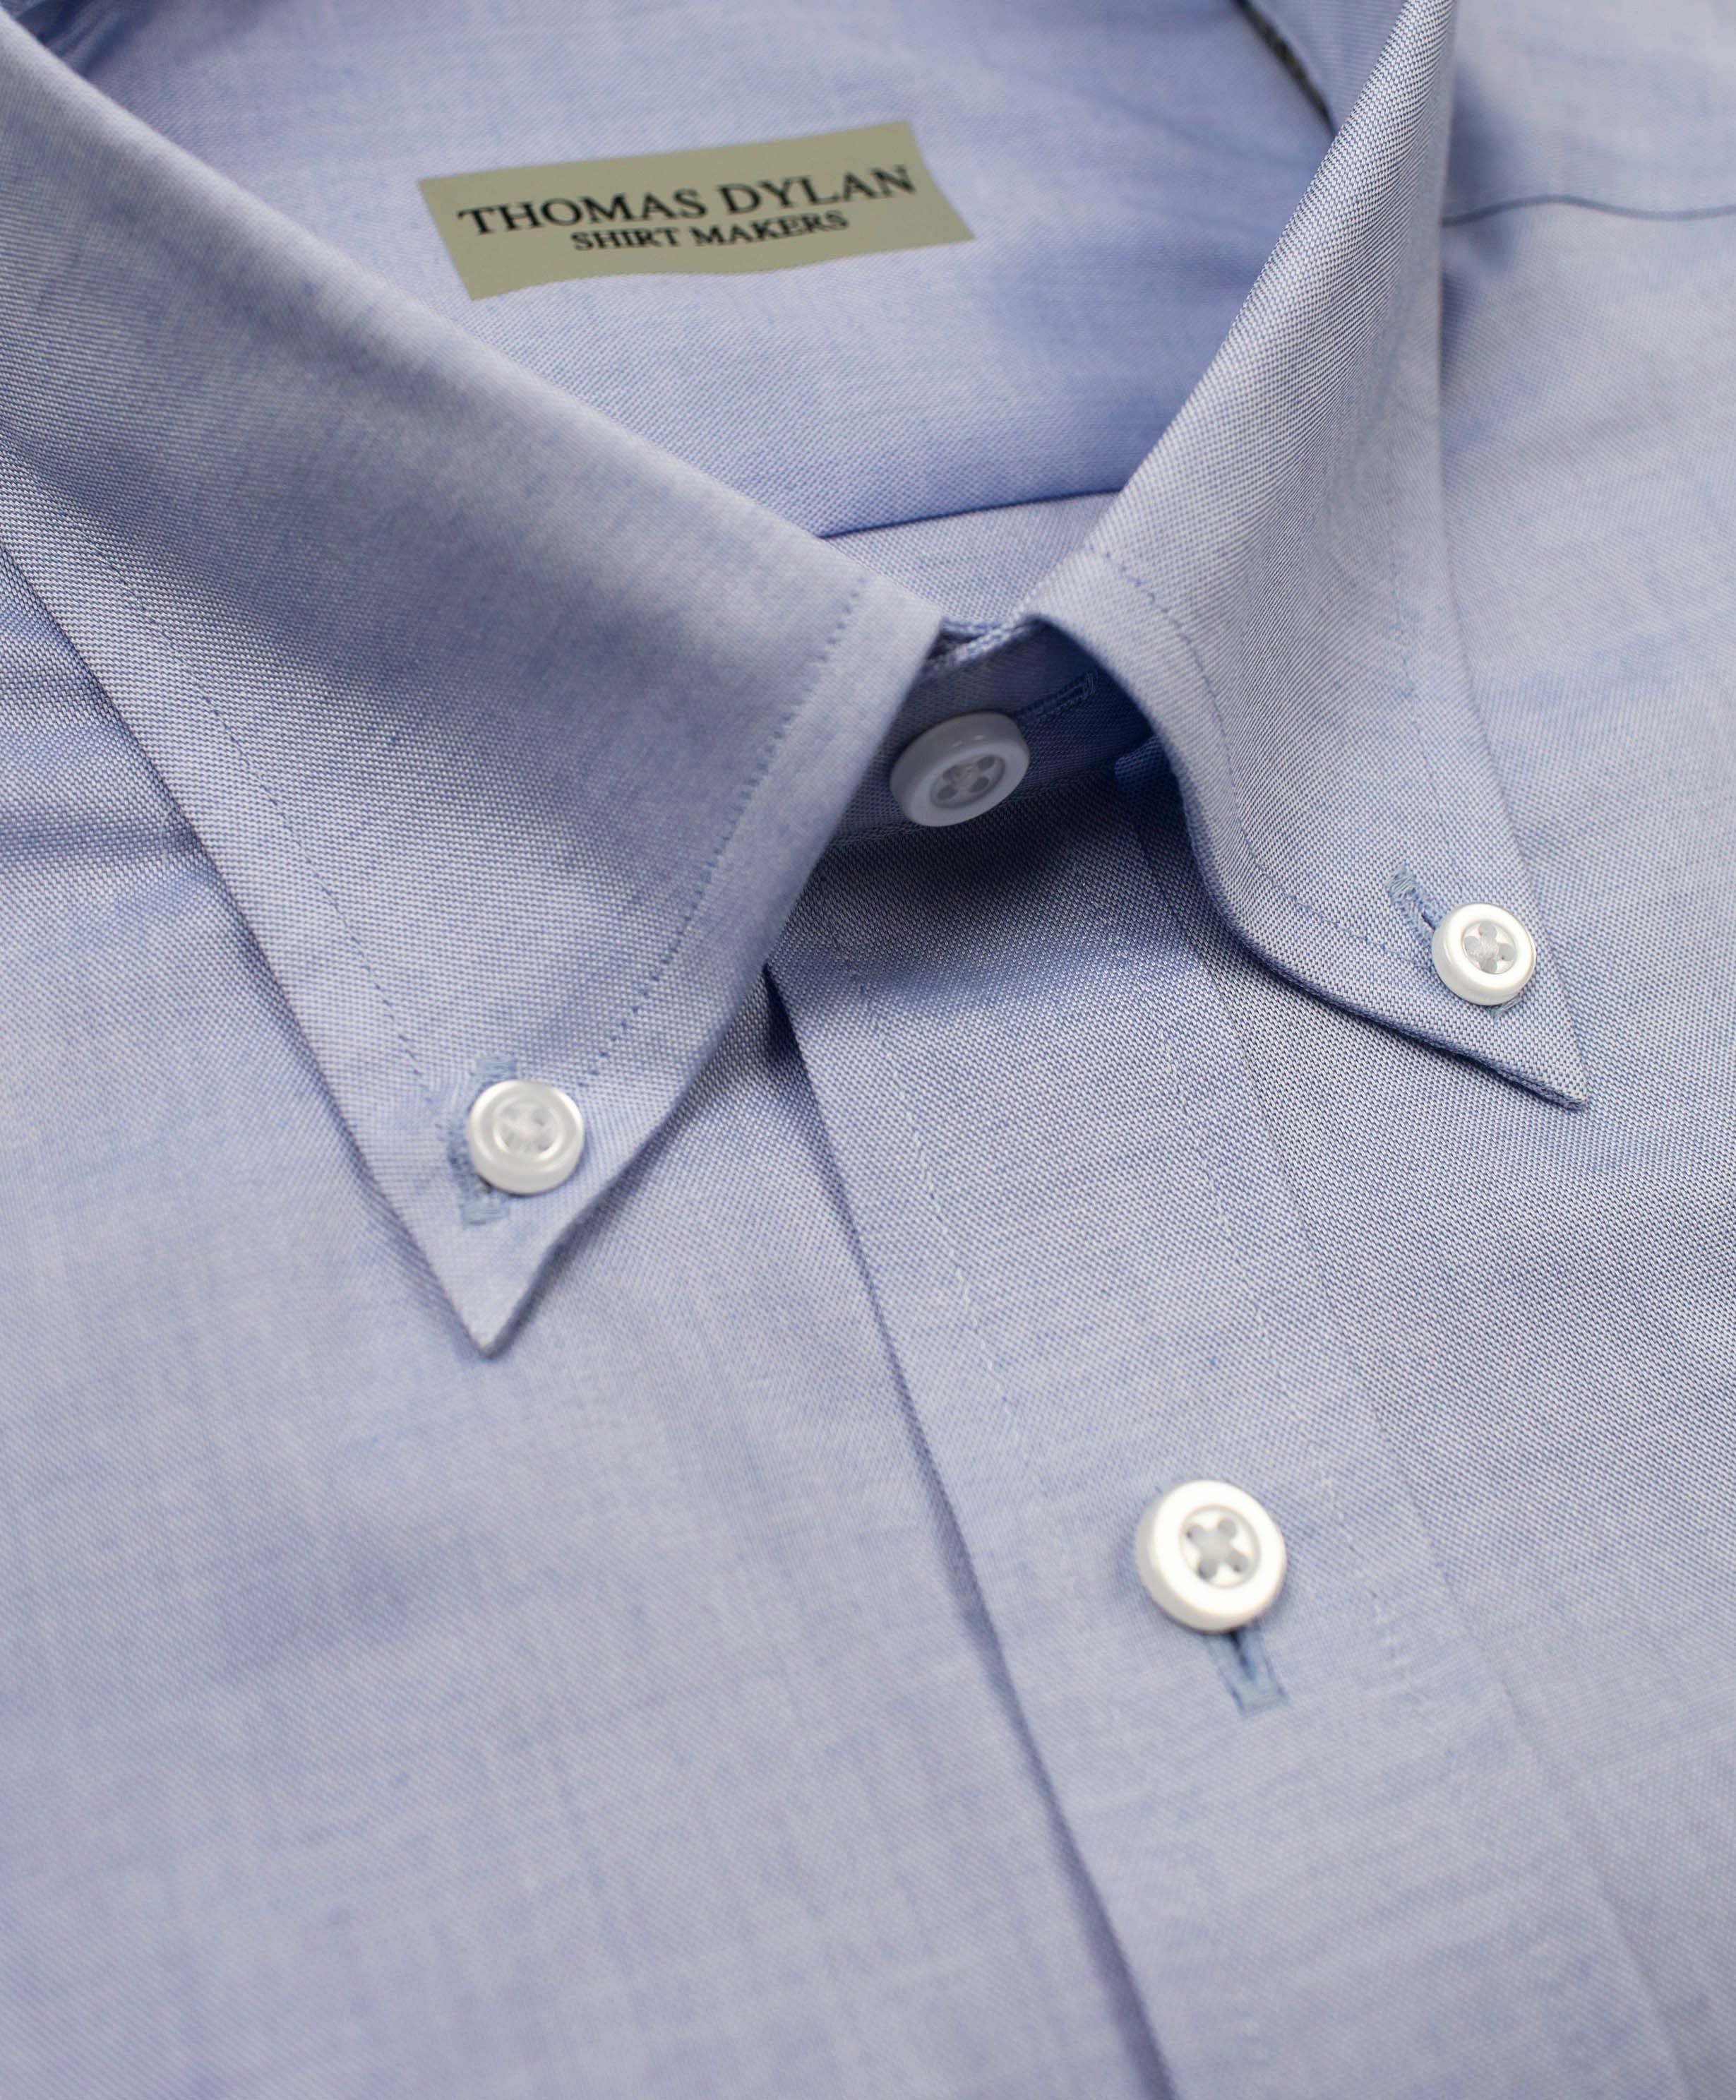 024 SS TF BD - Thomas Dylan Blue Short Sleeve Tailored Fit Button Down Collar